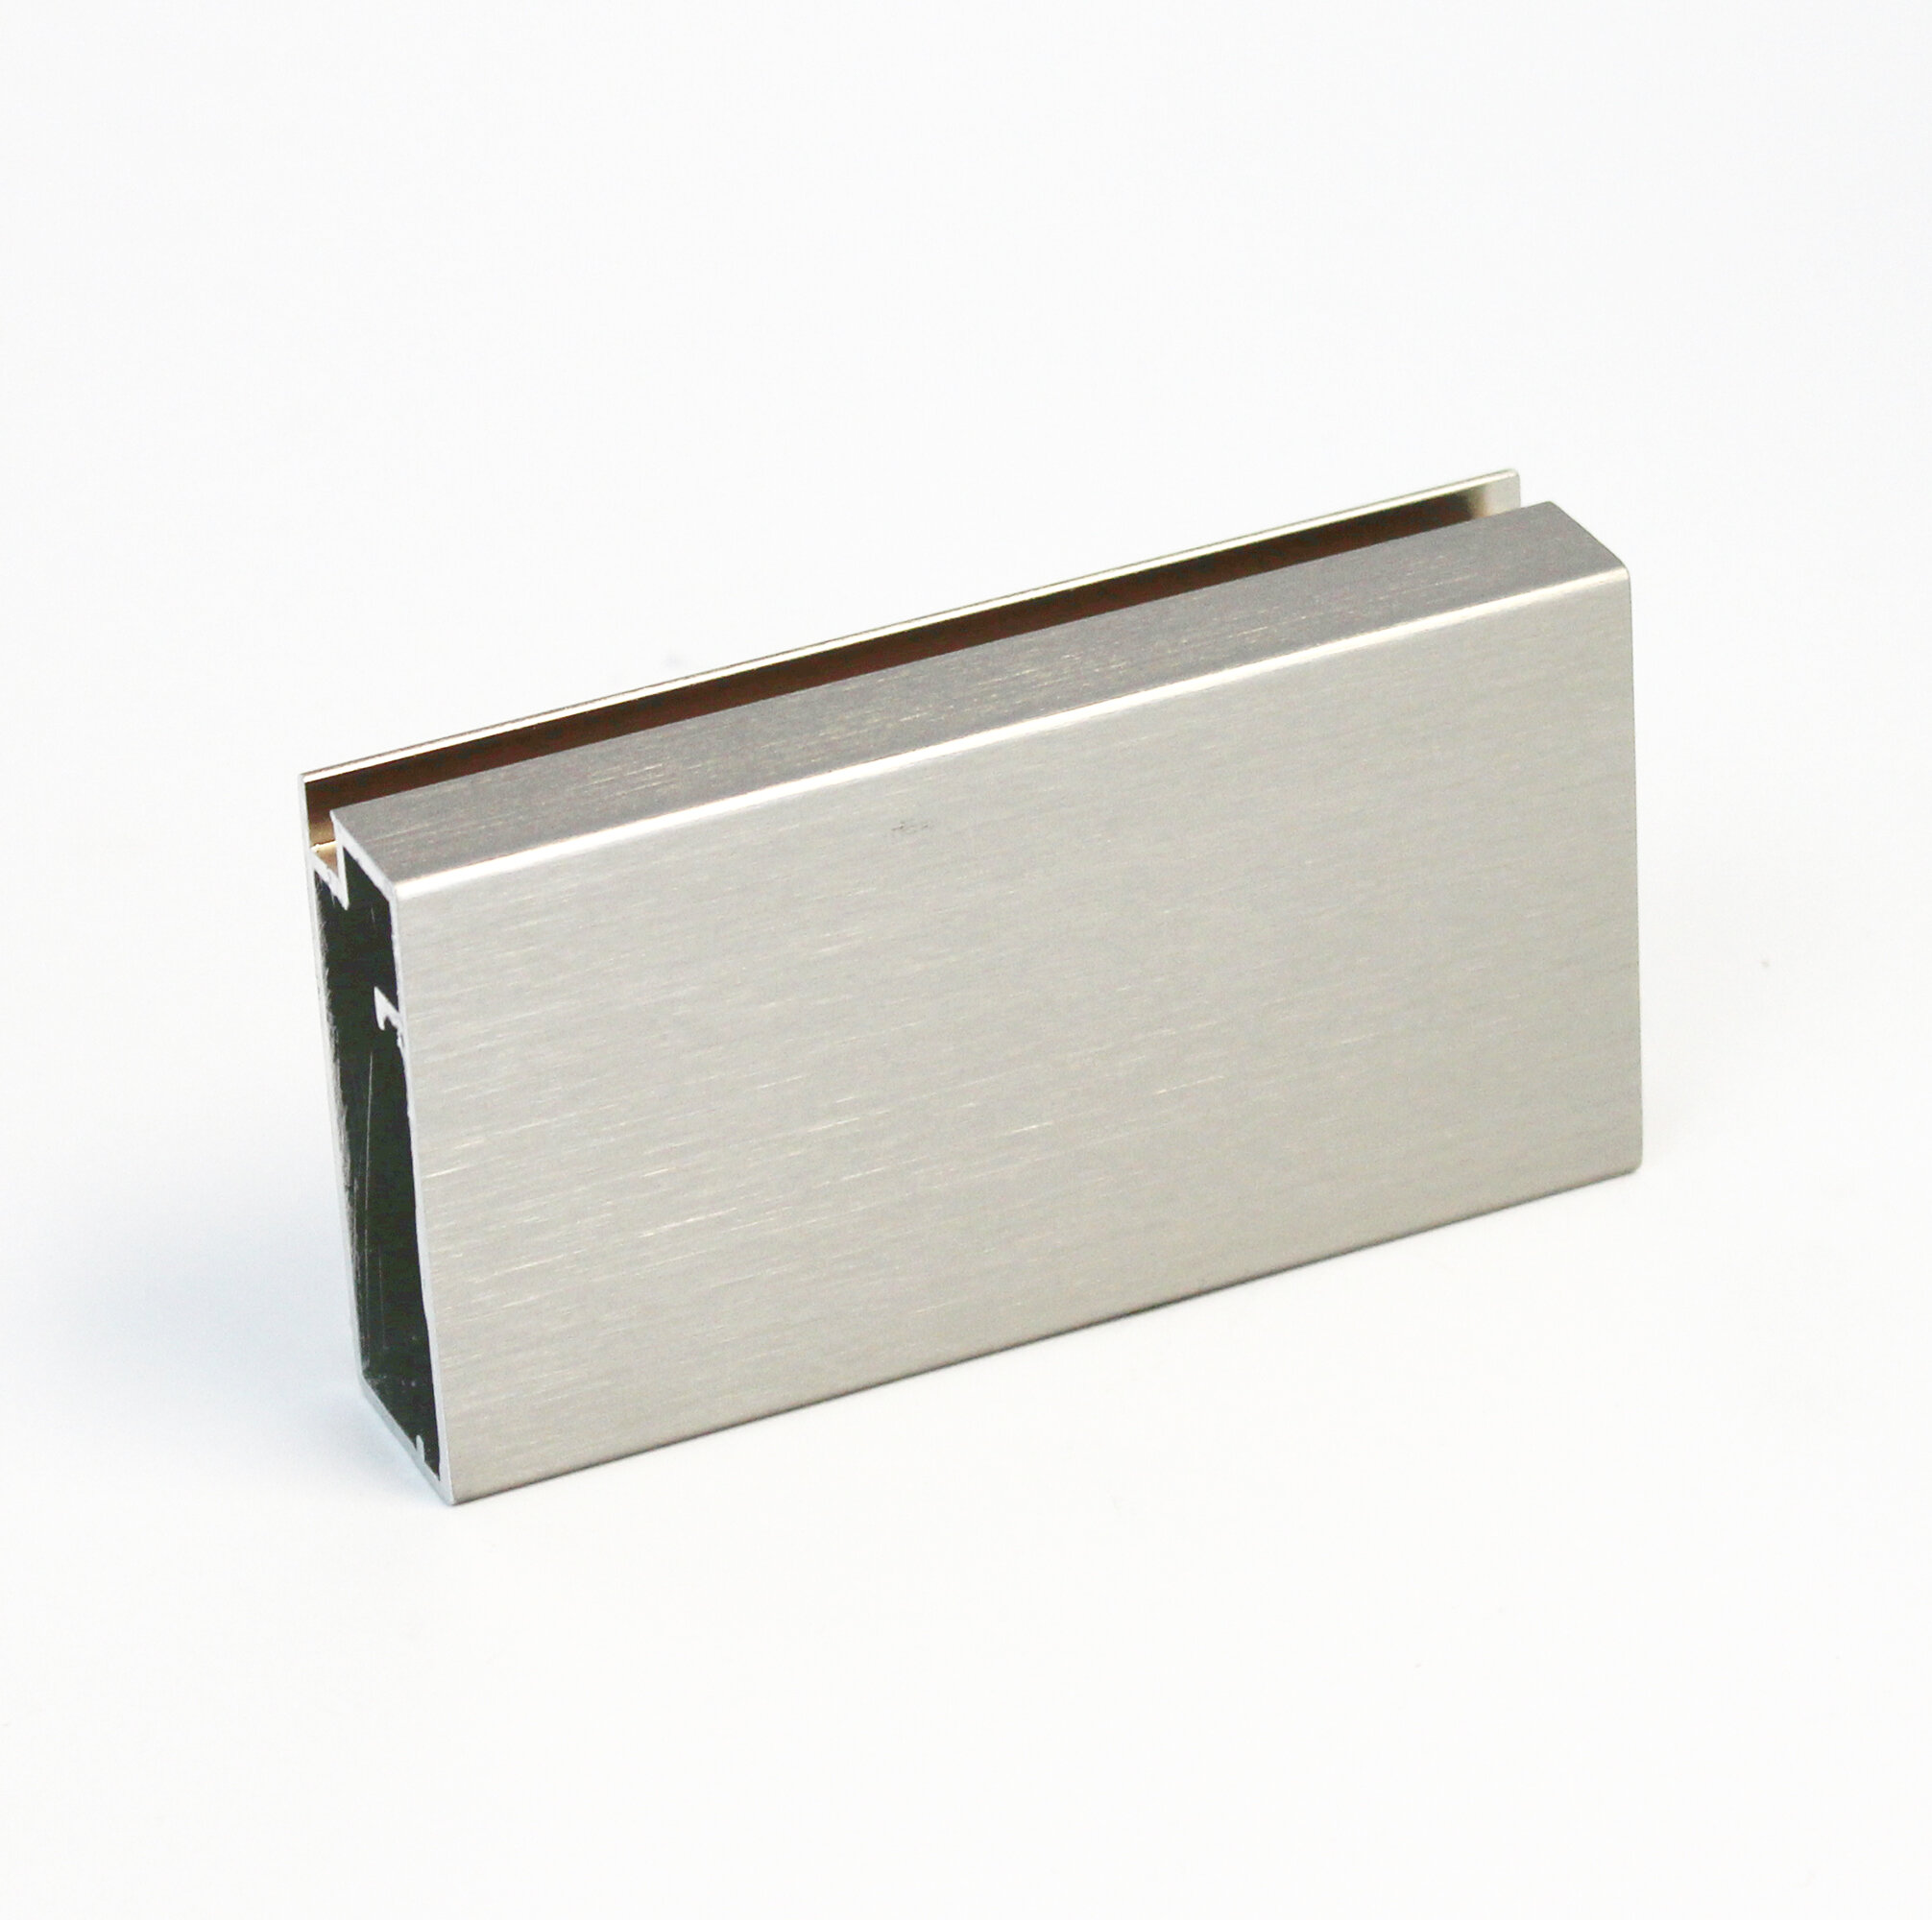 AF003Section_Stainless.jpg